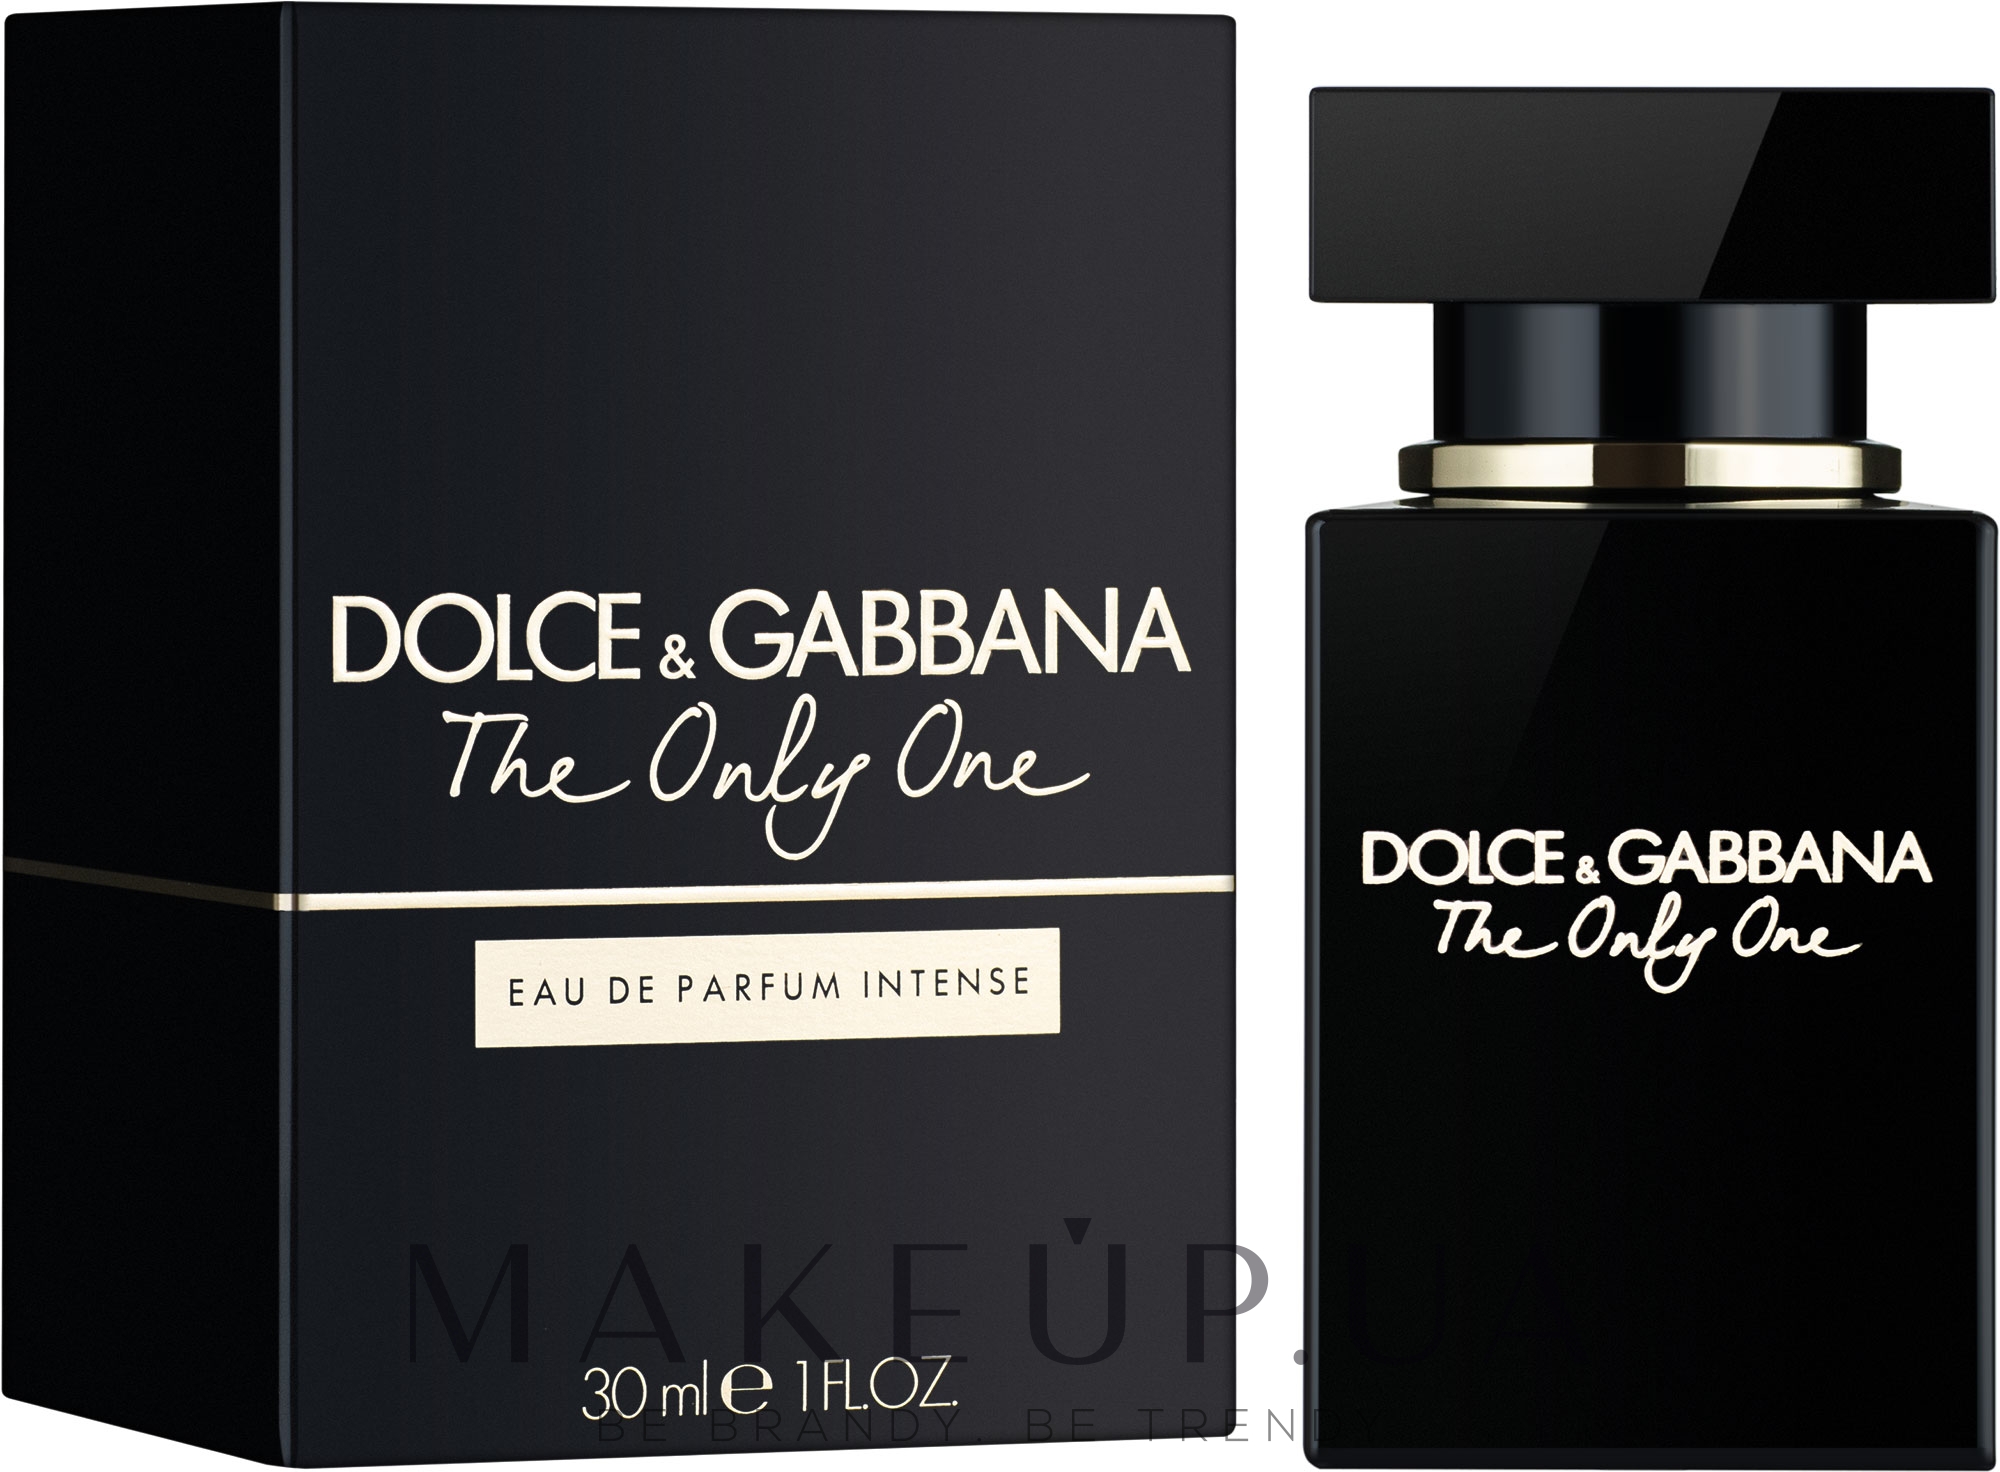 The only one intense dolce. Dolce Gabbana the only one intense женские. Dolce&Gabbana the only one intense 50 ml. Дольче Габбана the only one женские черные. Туалетная вода Дольче Габбана Онли Ван женские.